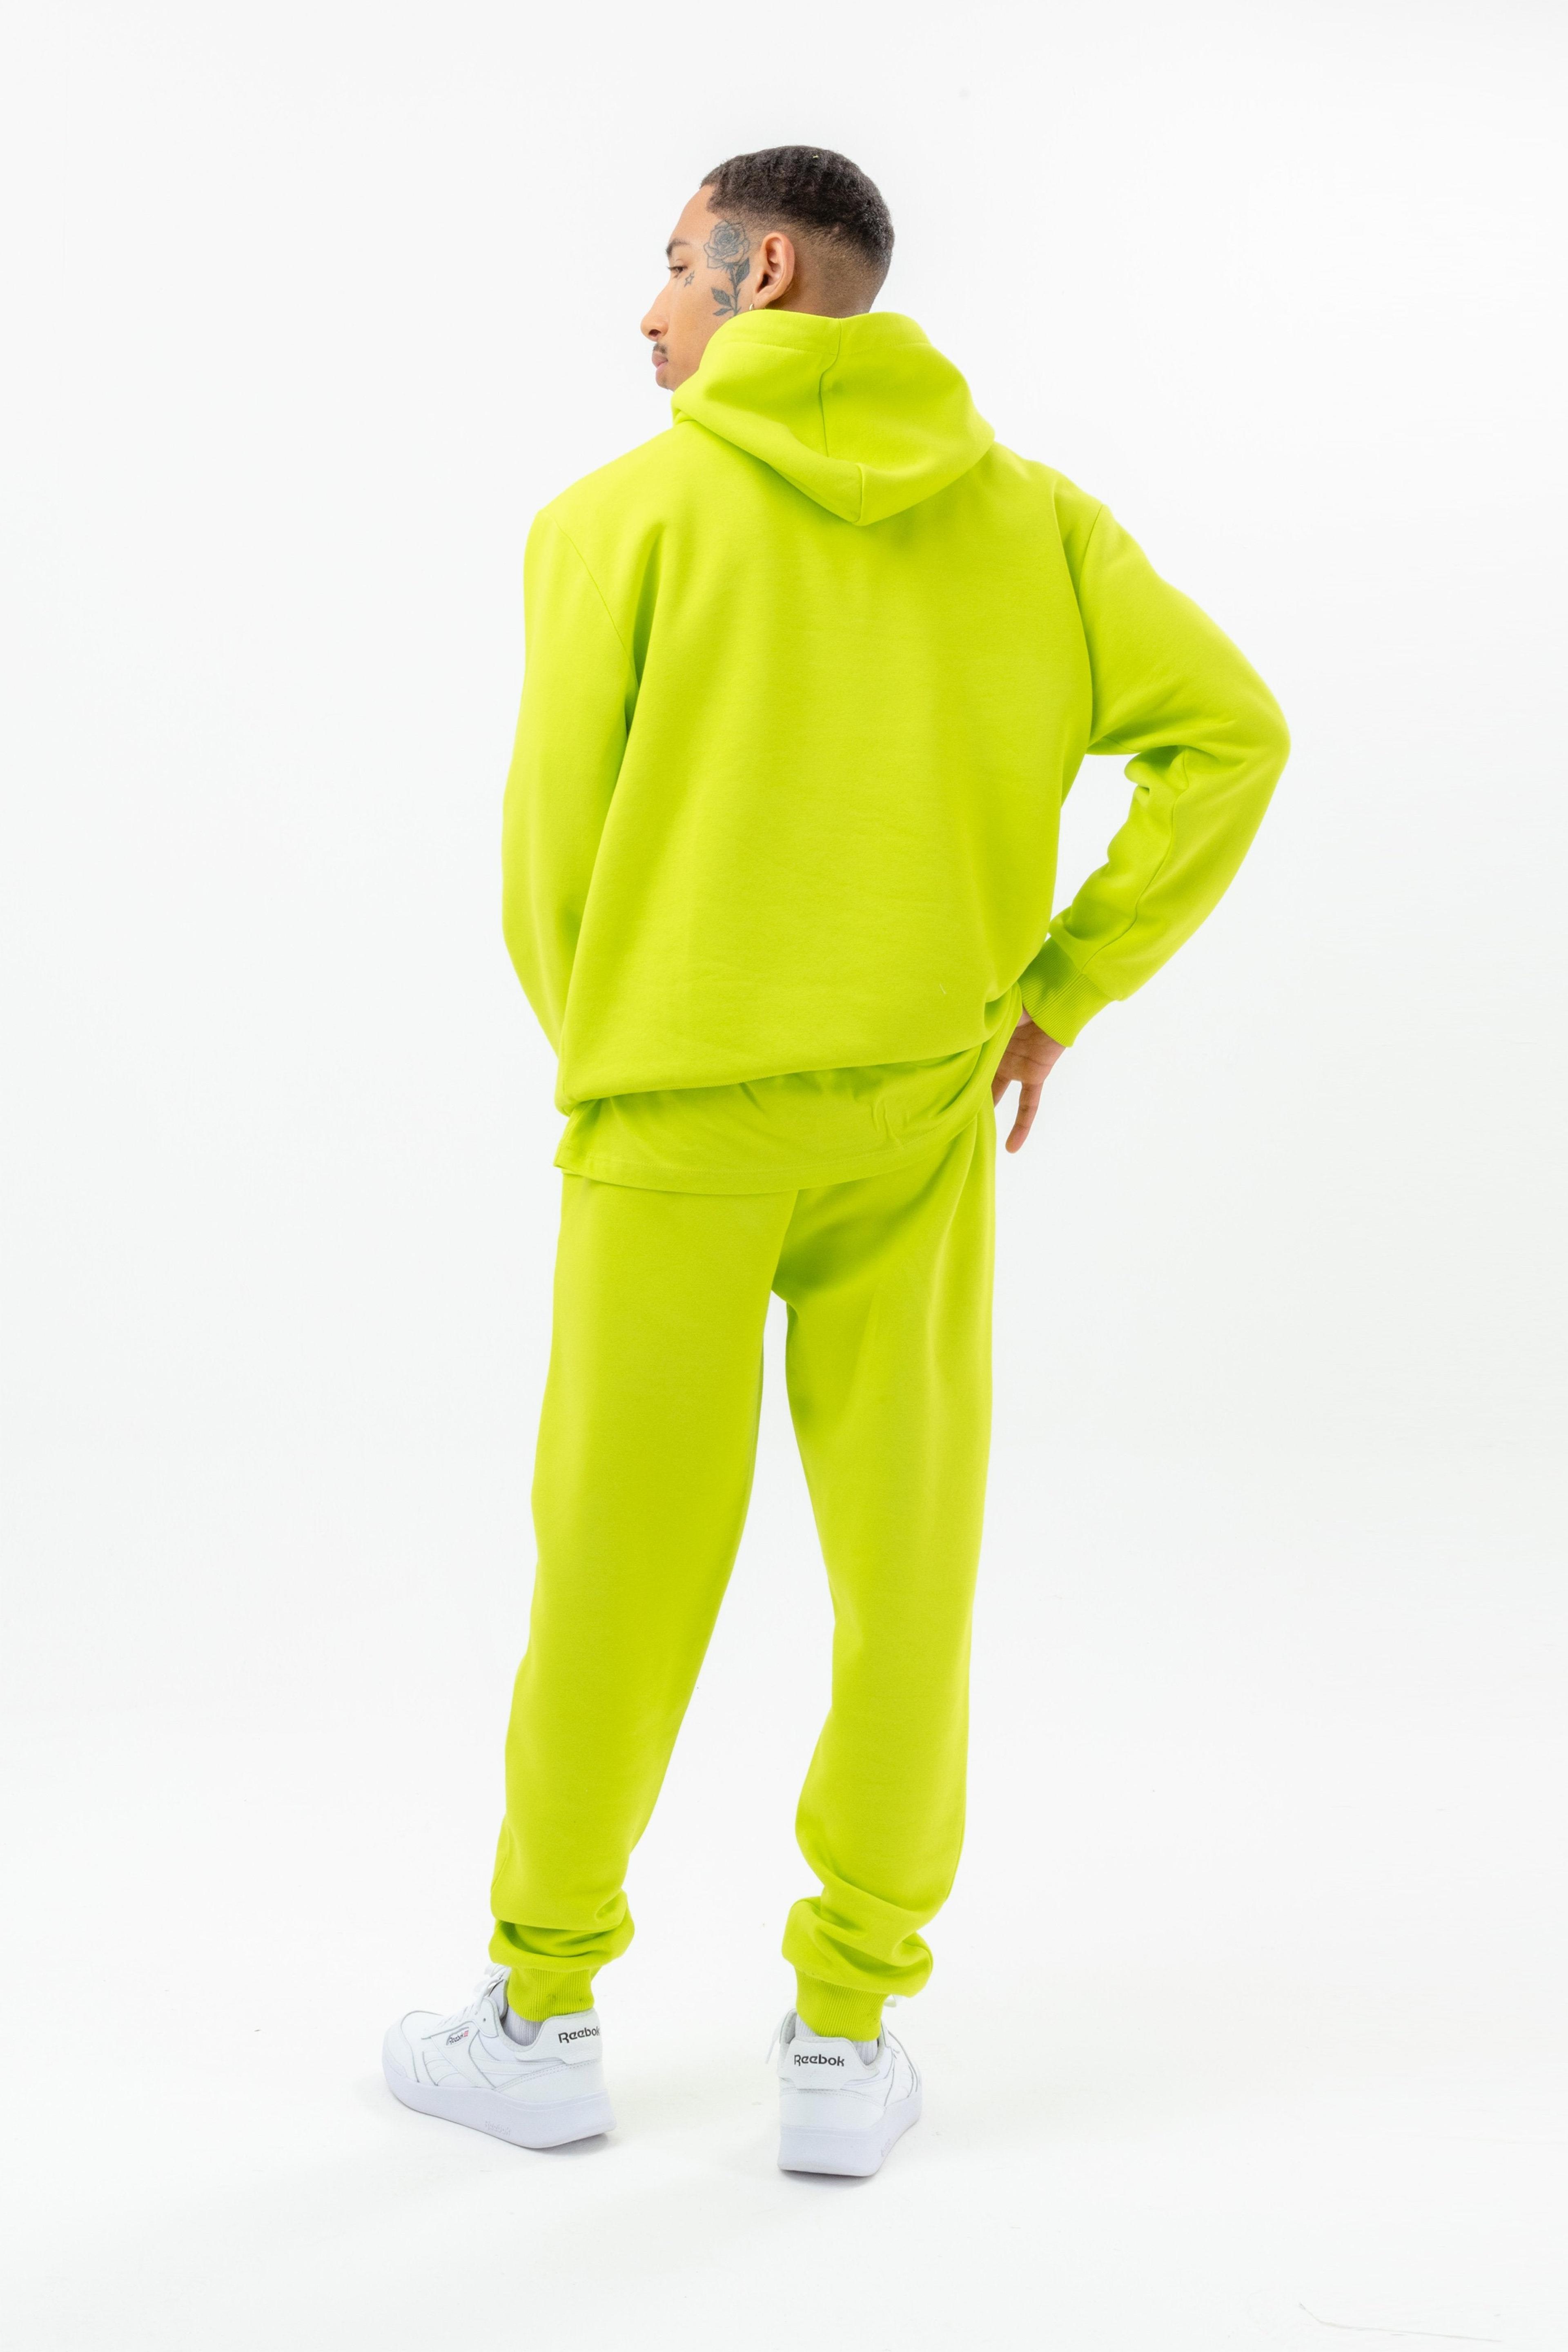 Alternate View 8 of CONTINU8 NEON GREEN OVERSIZED HOODIE